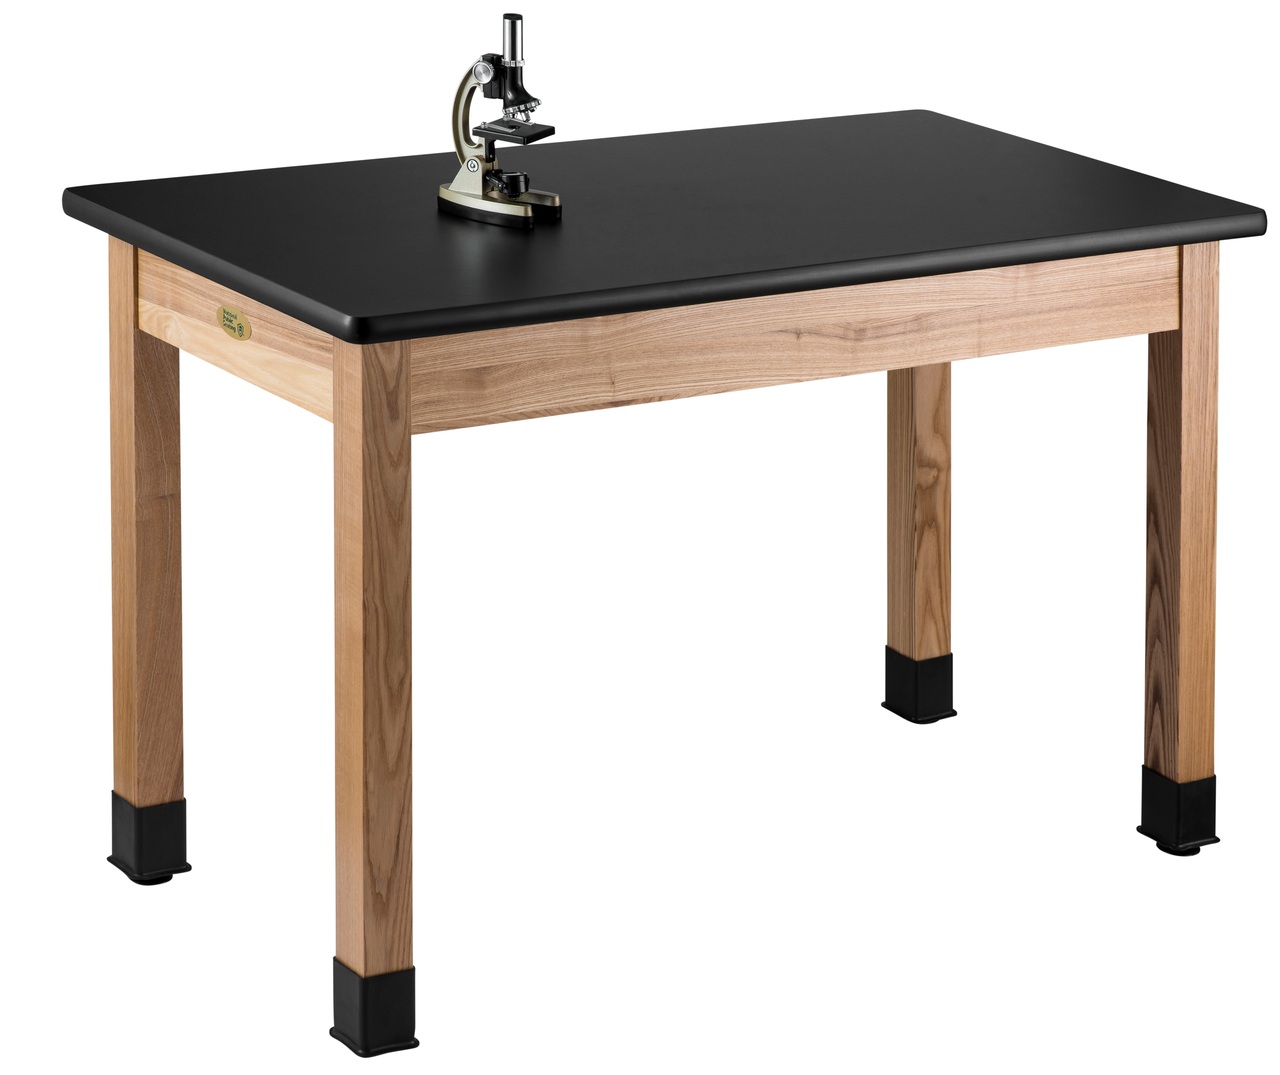 NPS Wood Science Lab Table -  42"x72"x30" -  HPL Top - Black Top and Ash Leg